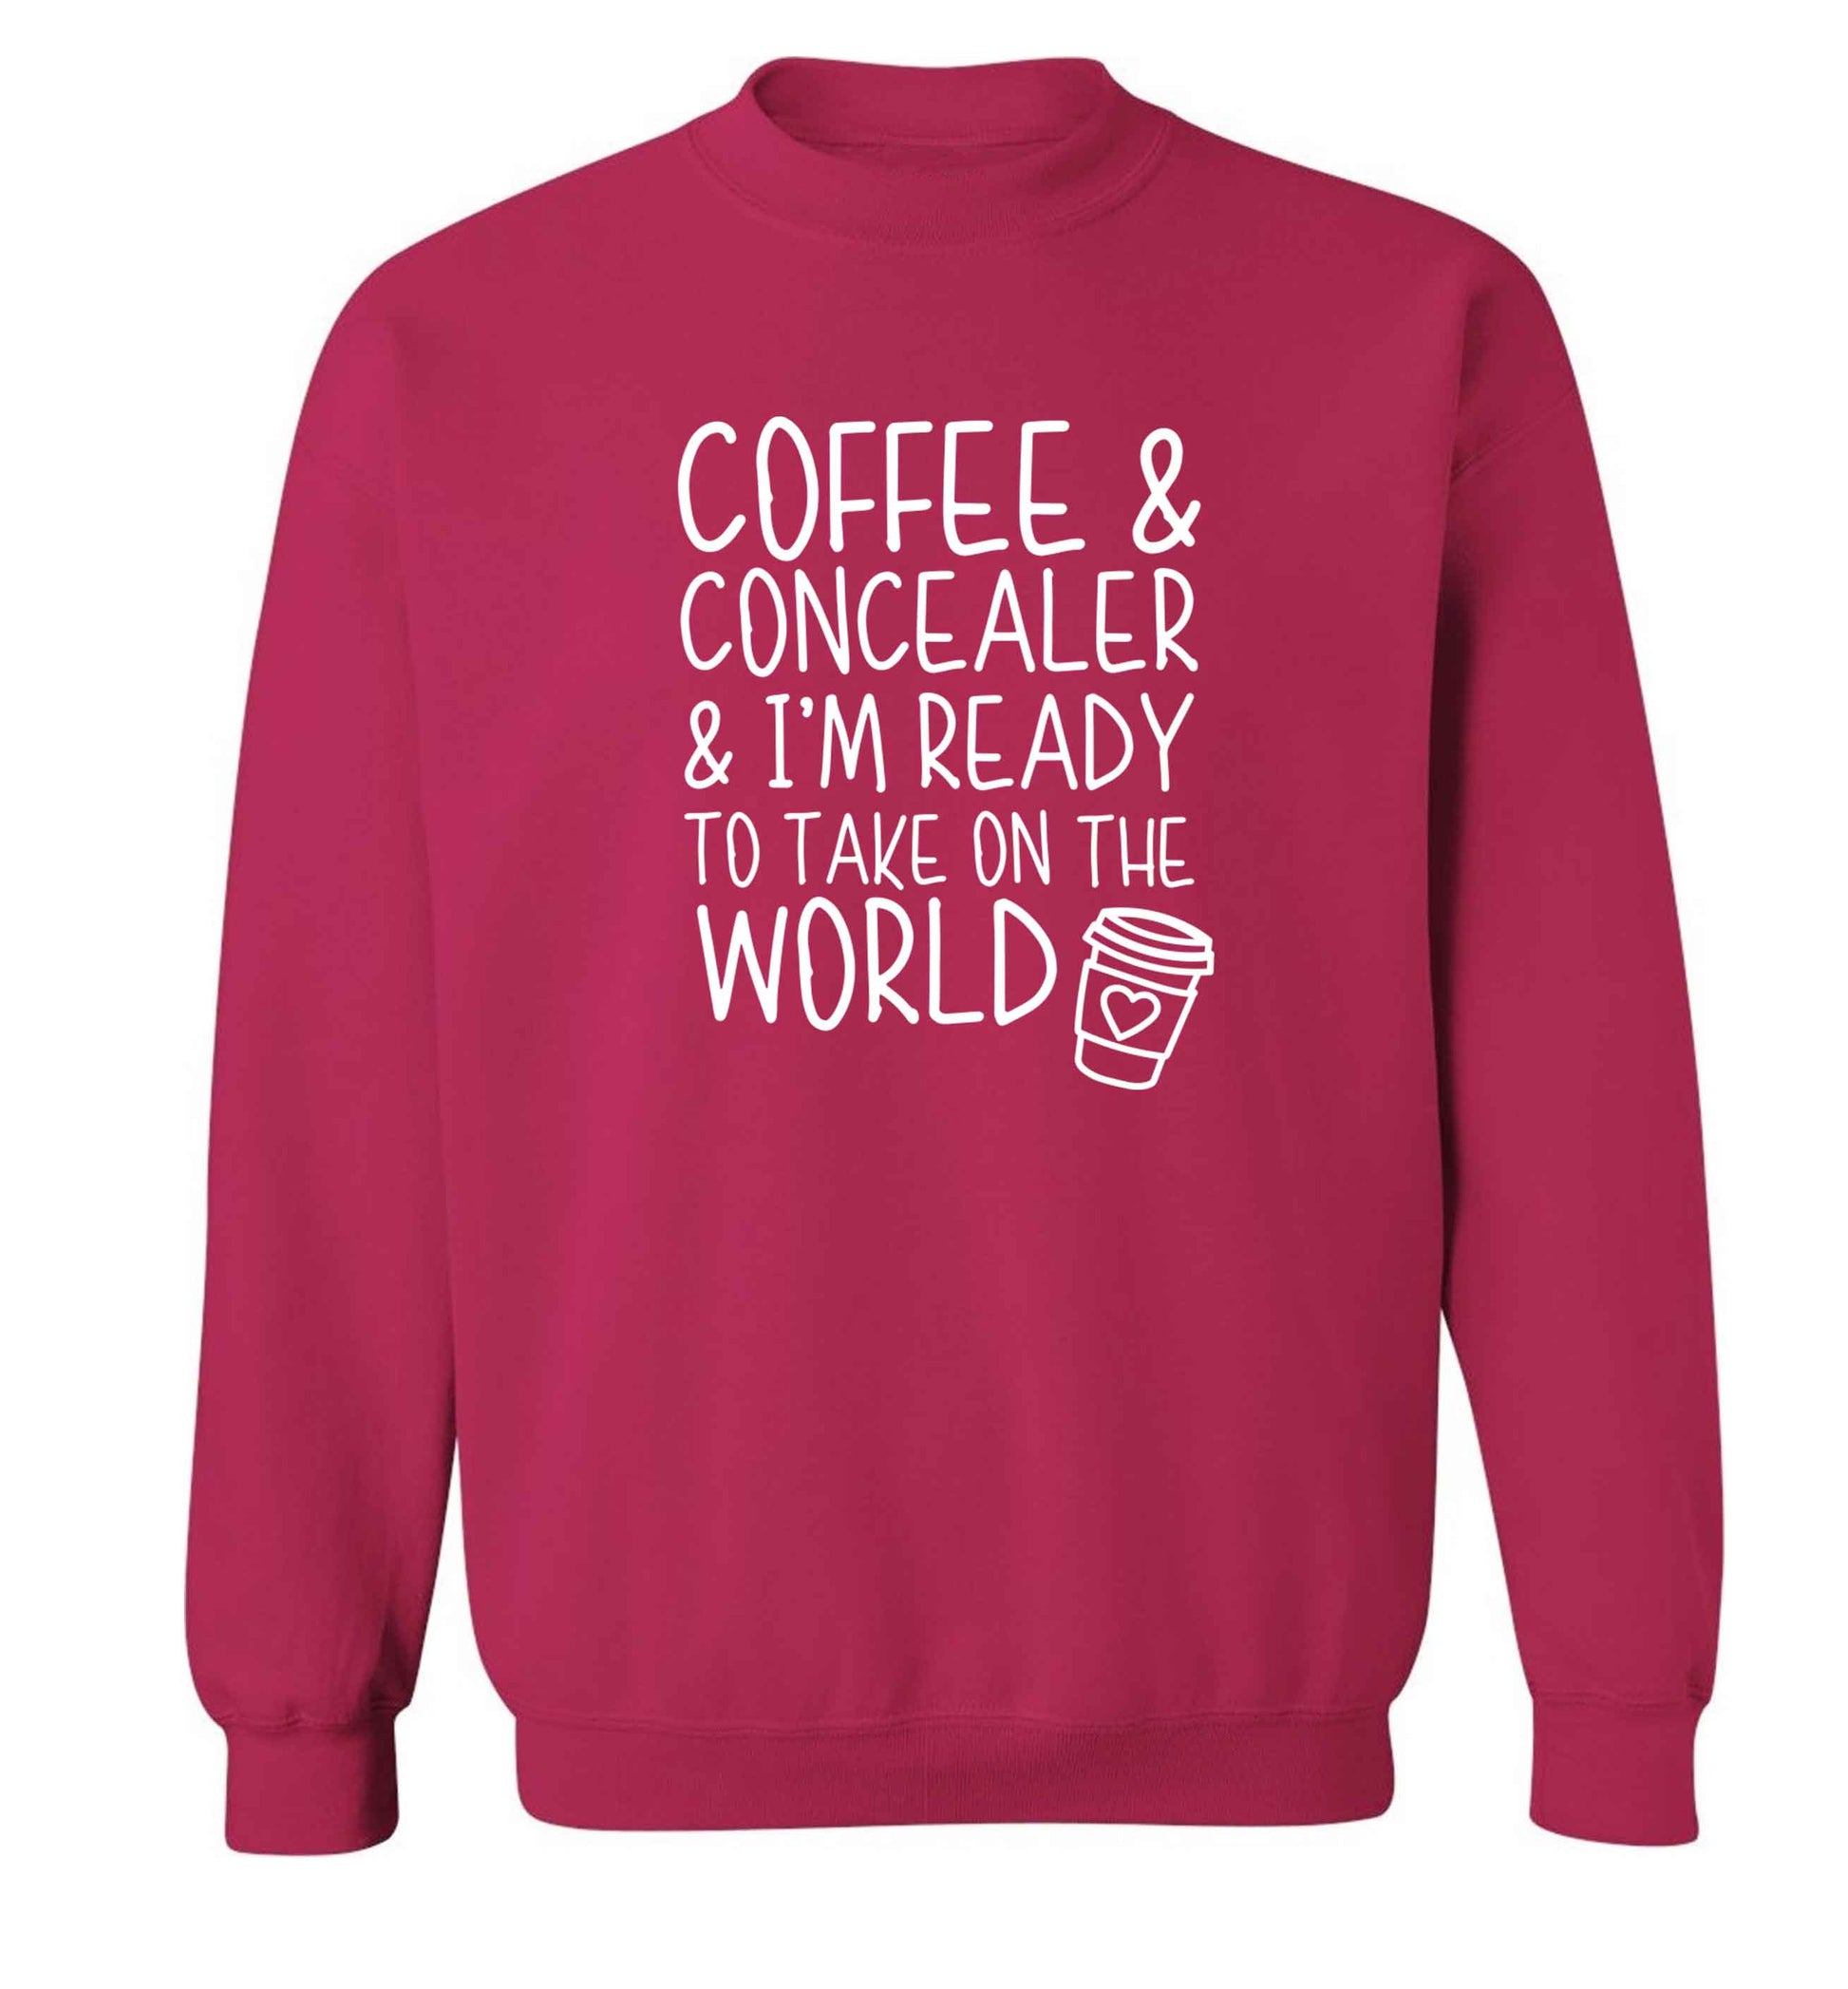 Coffee and concealer and I'm ready to take on the world adult's unisex pink sweater 2XL